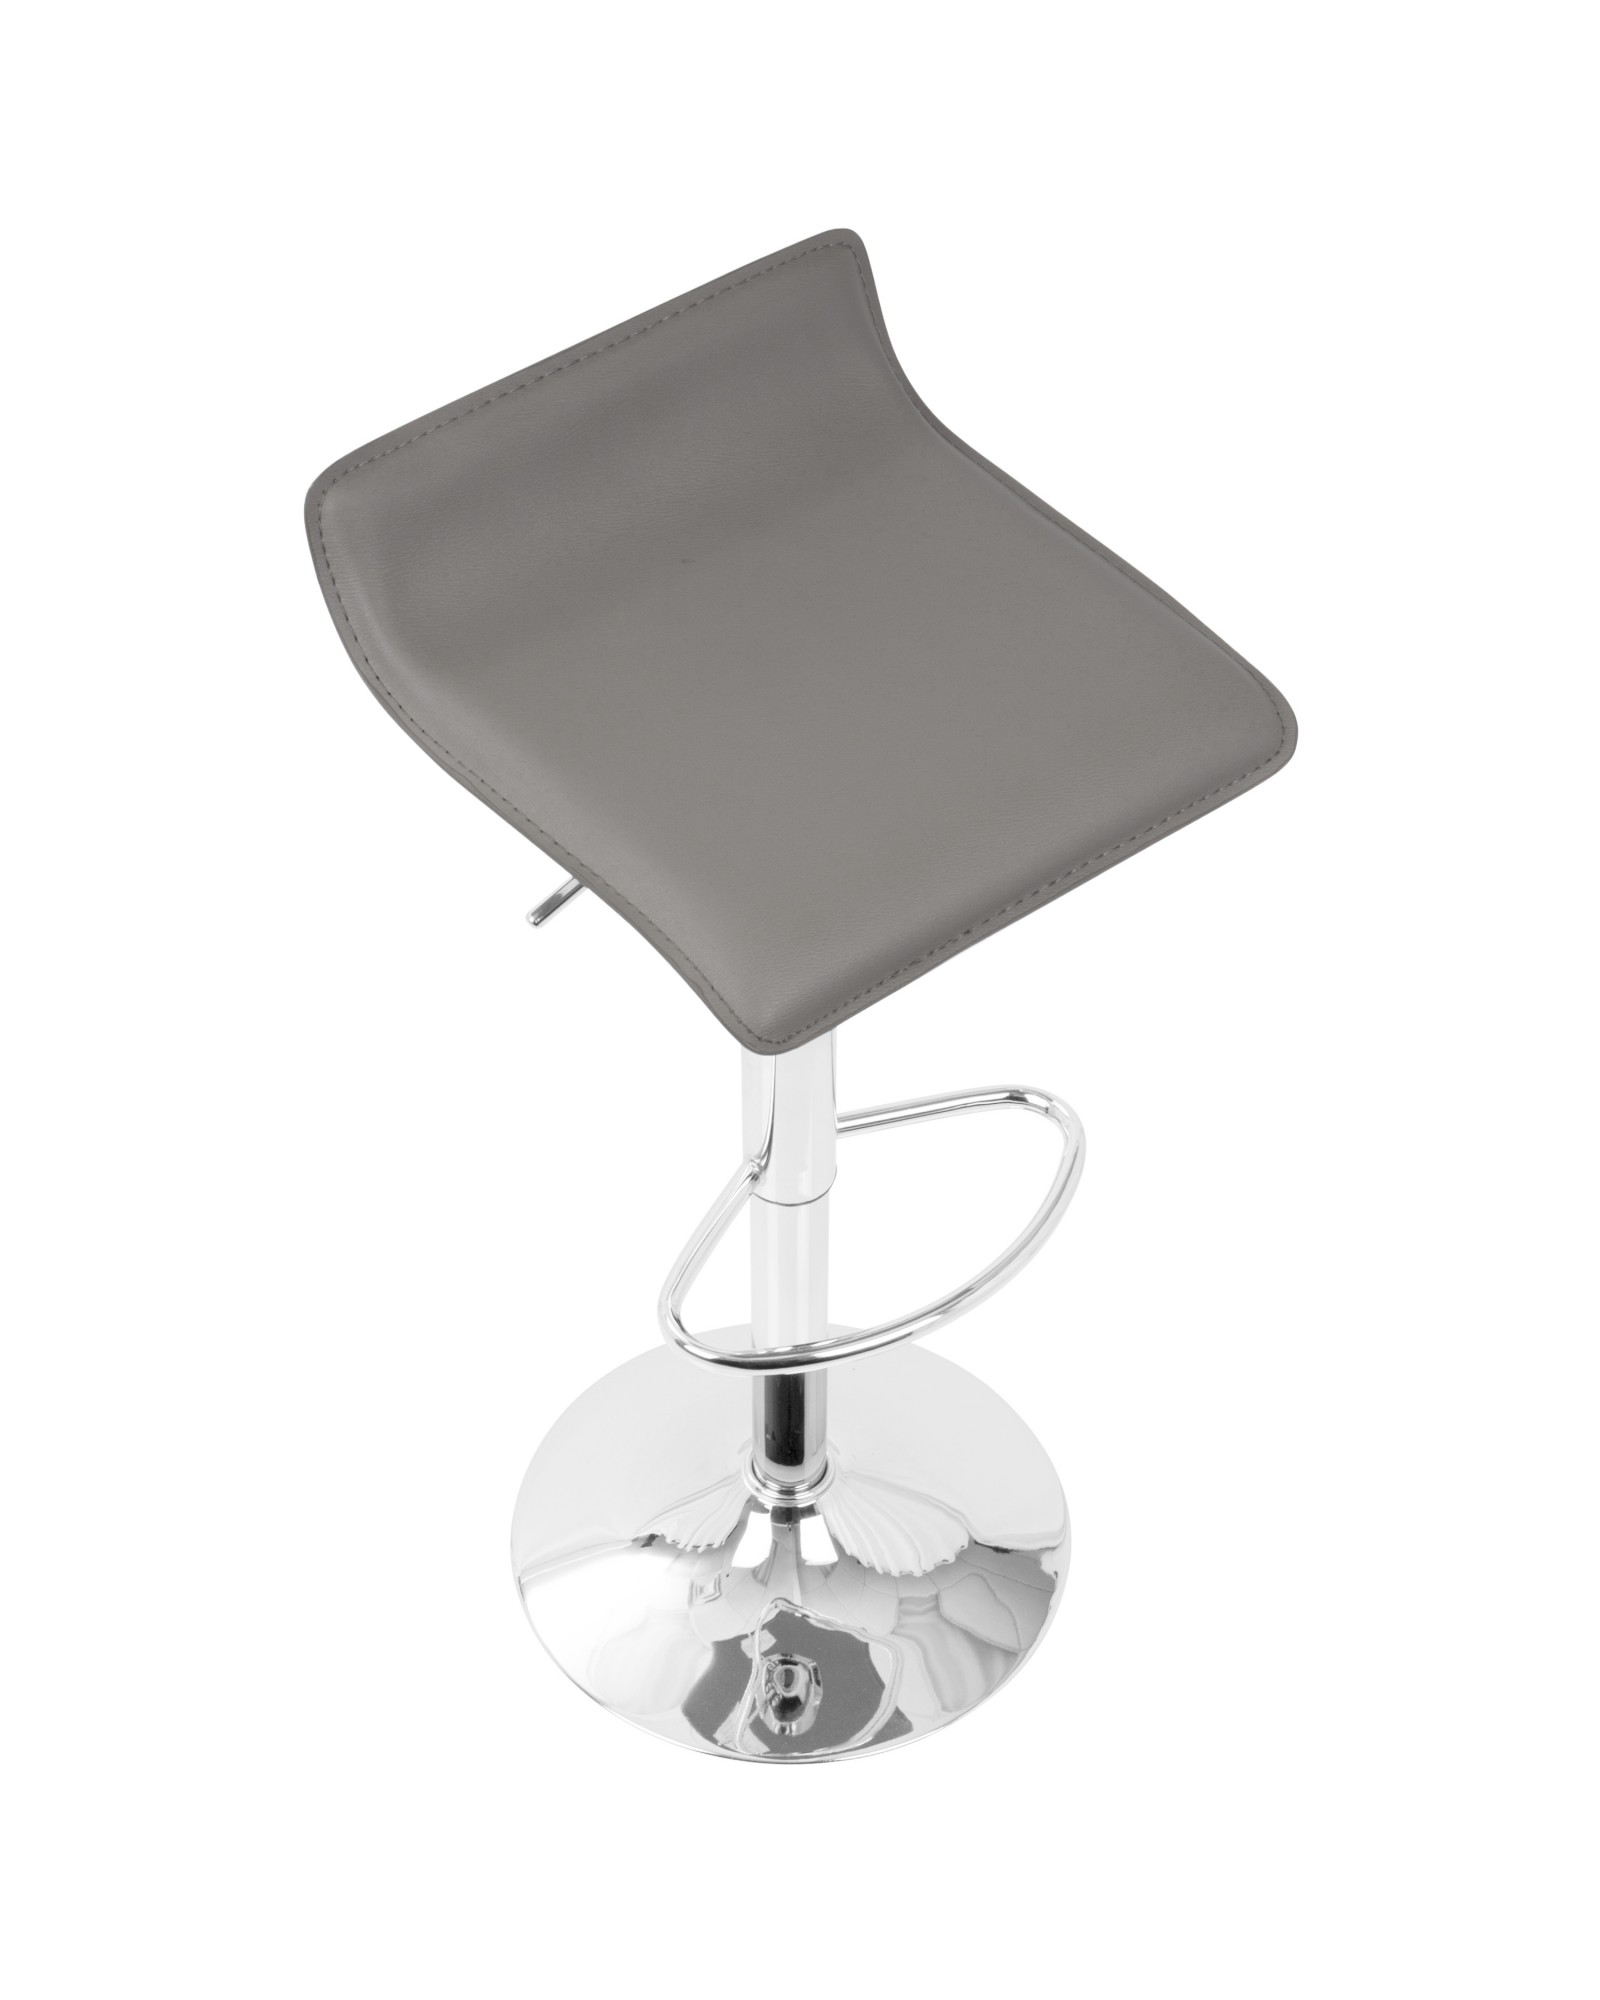 Ale Contemporary Adjustable Barstool in Grey PU Leather - Set of 2